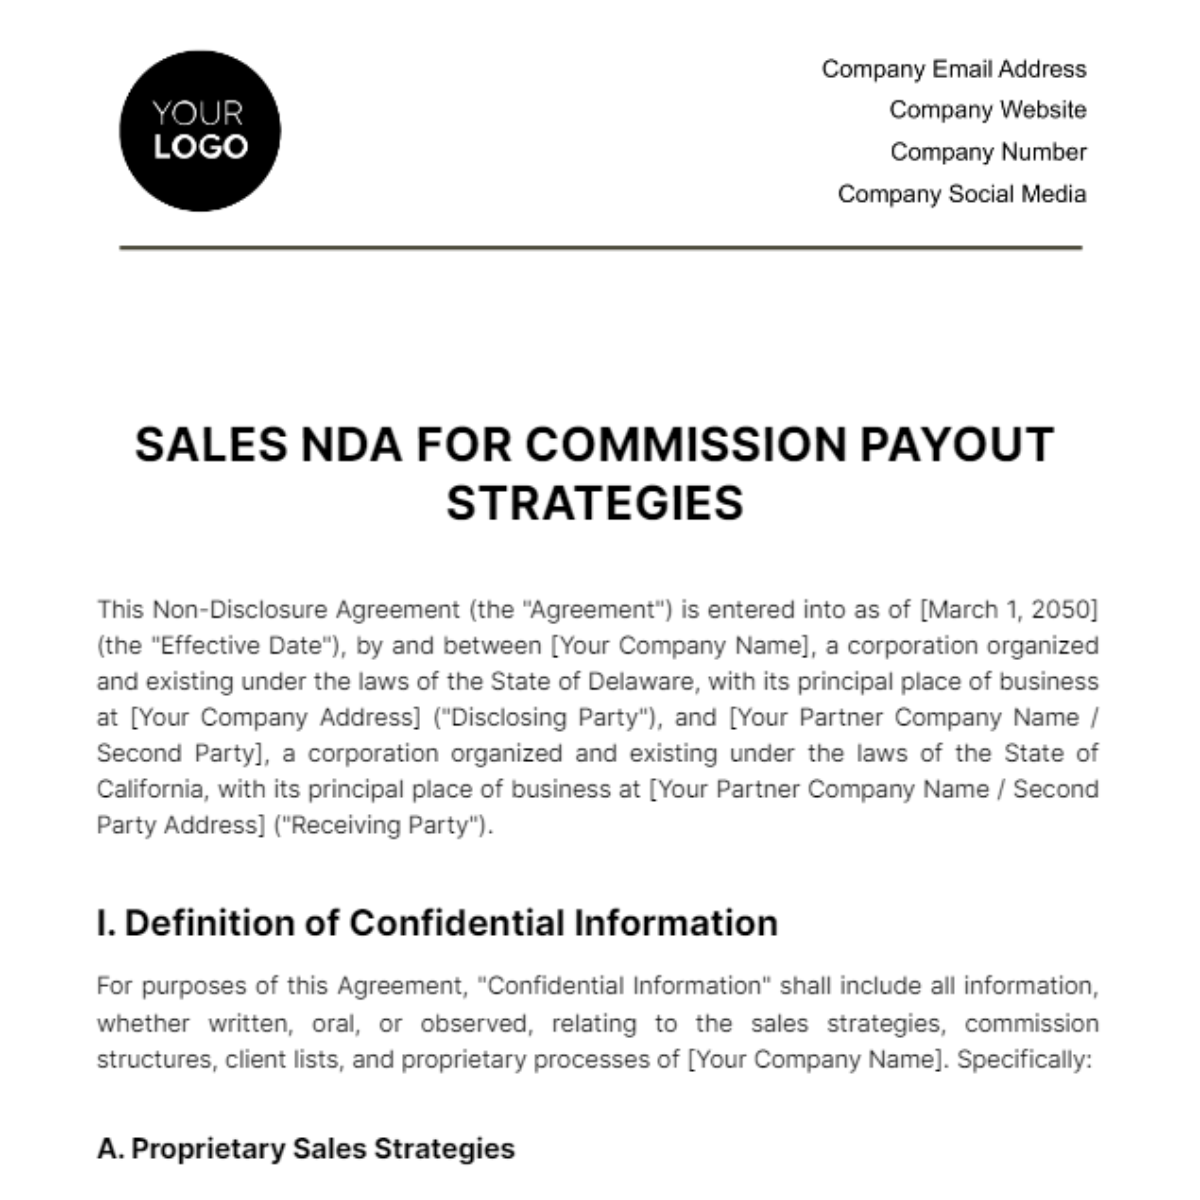 Free Sales NDA for Commission Payout Strategies Template